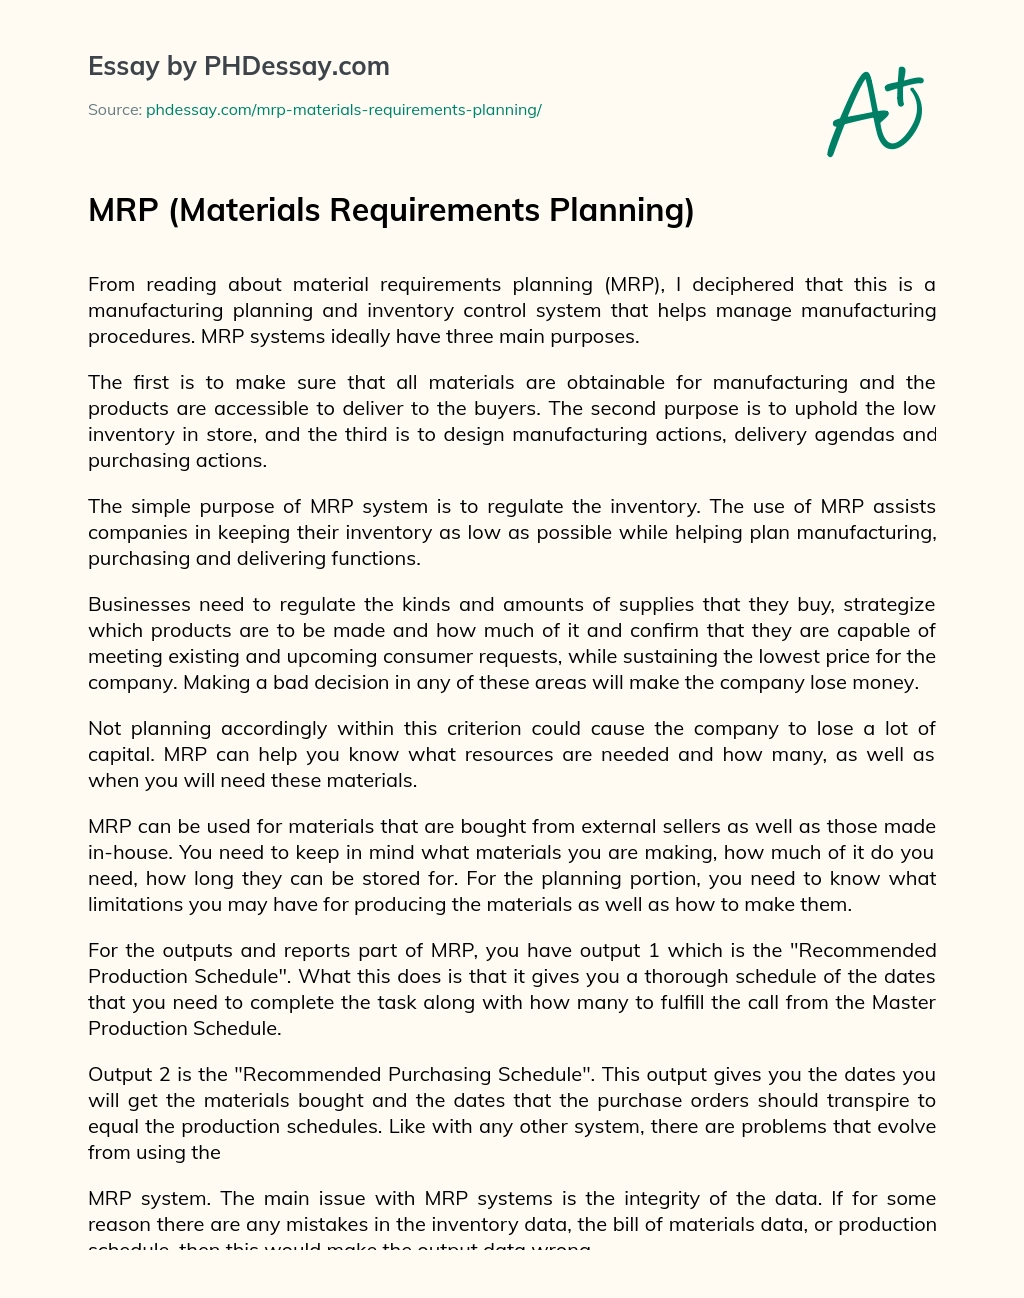 MRP (Materials Requirements Planning) essay